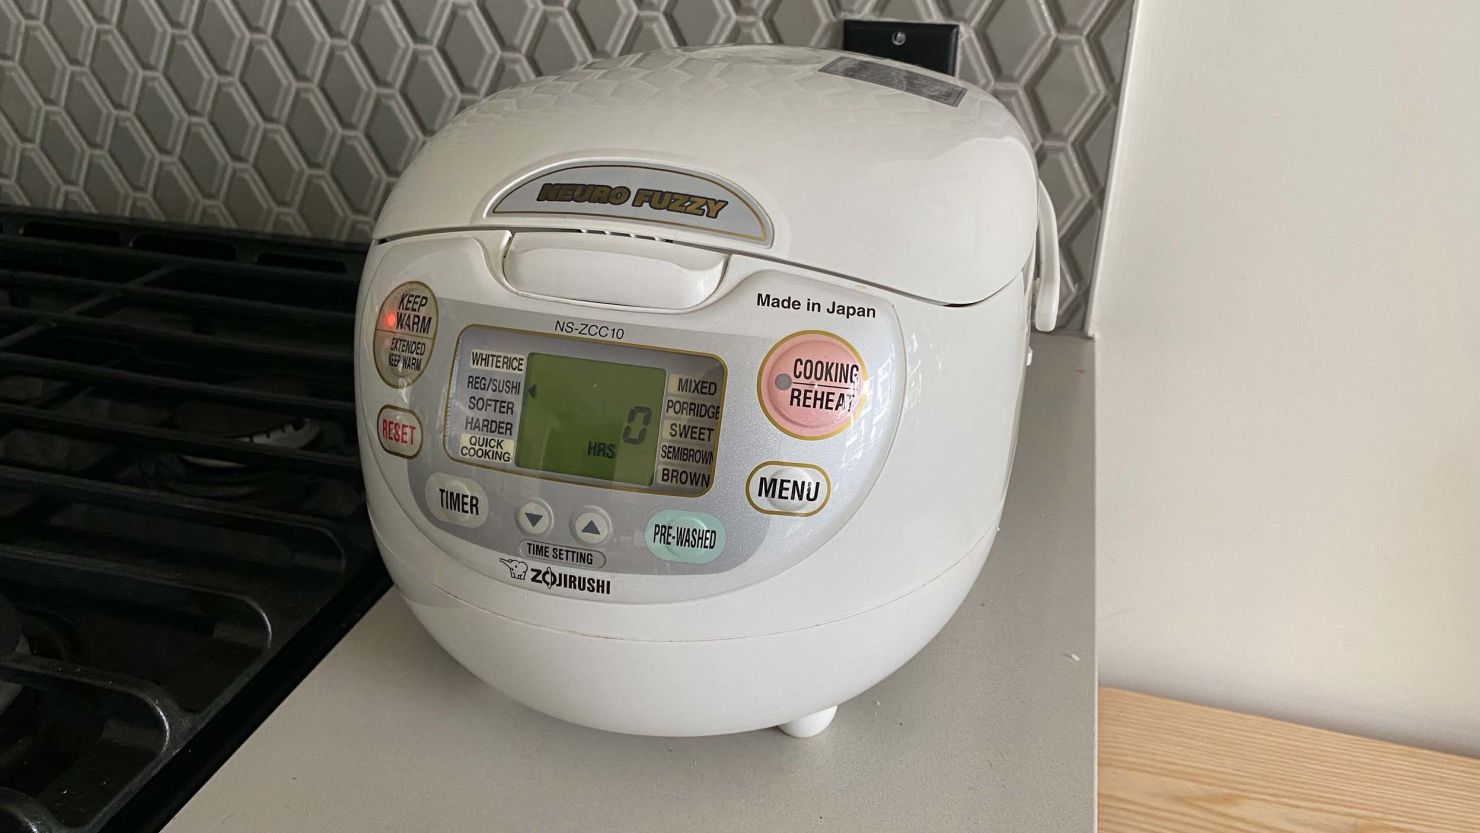 Instructions for Using a Neuro Fuzzy Rice Cooker